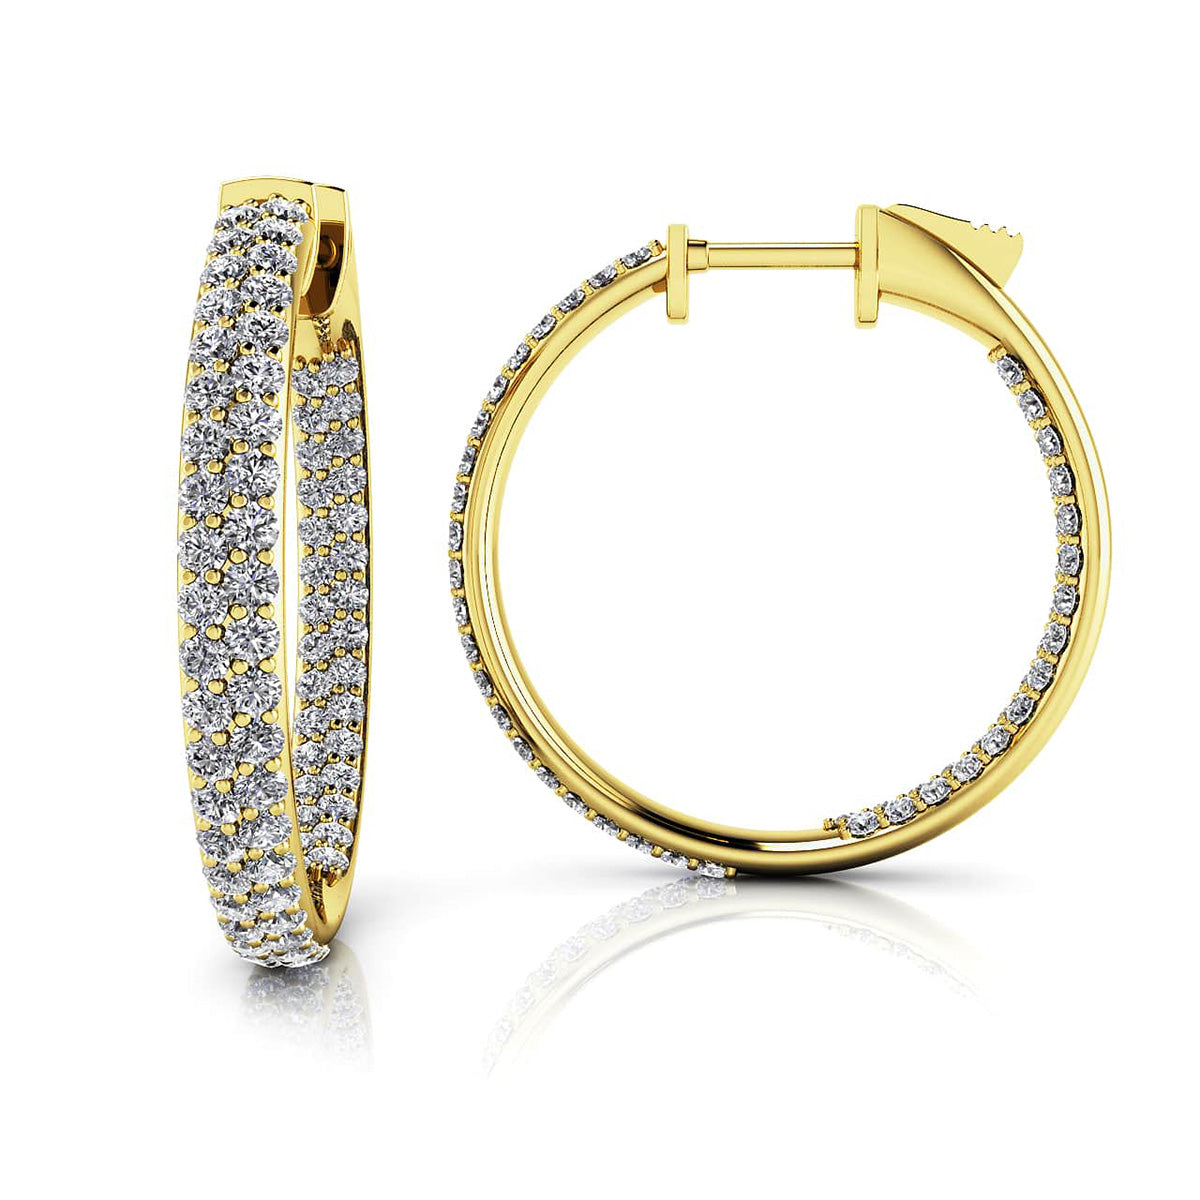 Inside Out Diamond Pave Hoop Earrings Small